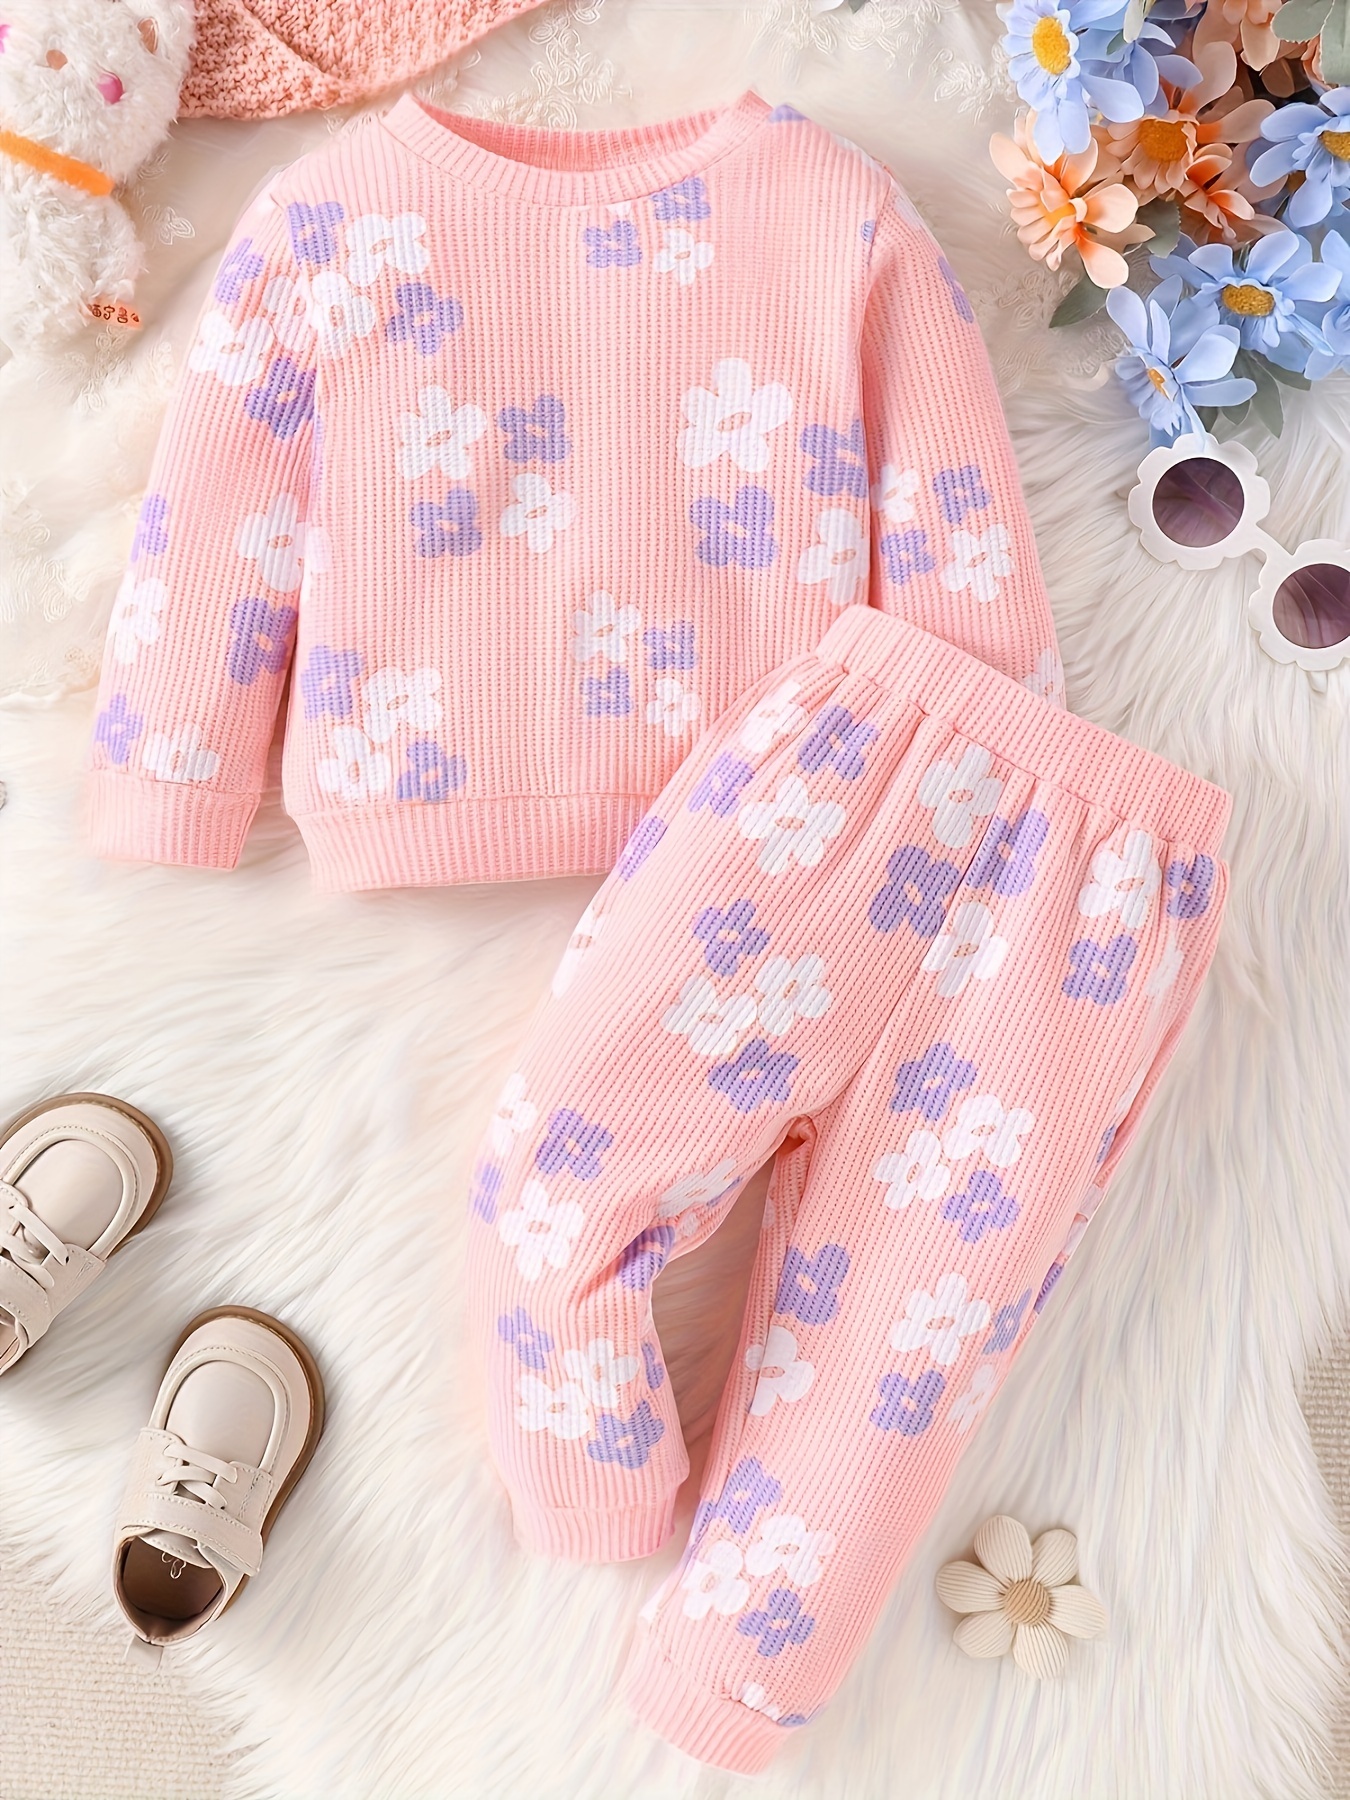 Trendy Toddler Clothing - UNIQUE Children's Clothing and Accessories